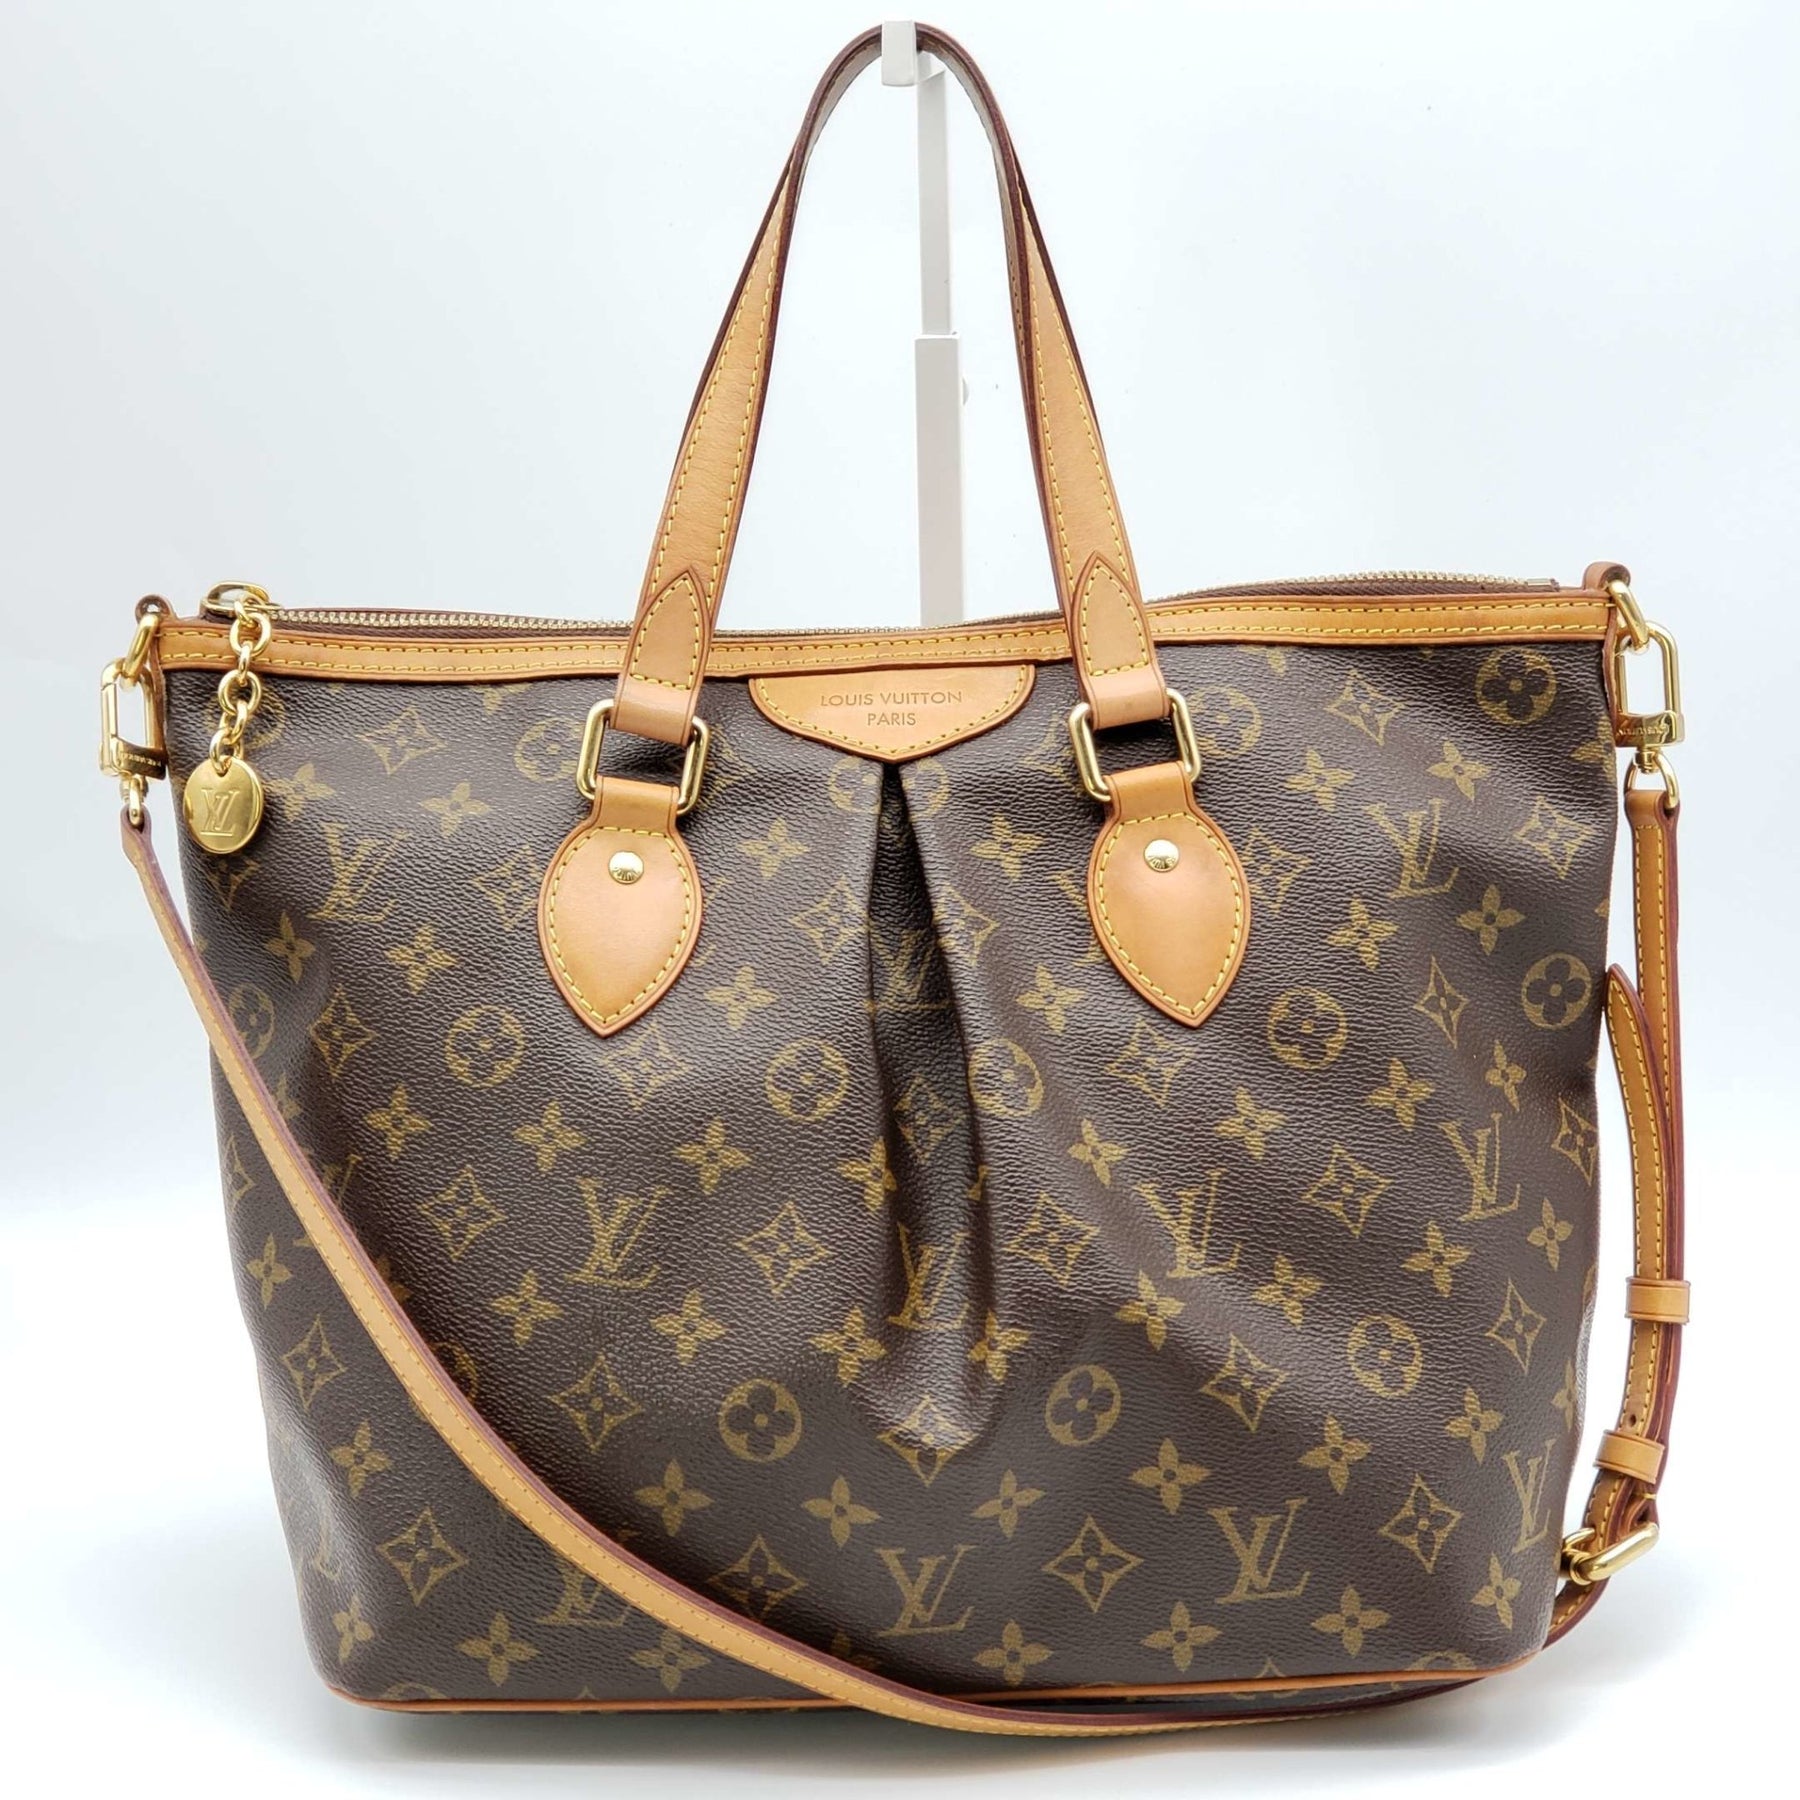 Louis Vuitton, Caissa Tote PM, Wear and Tear